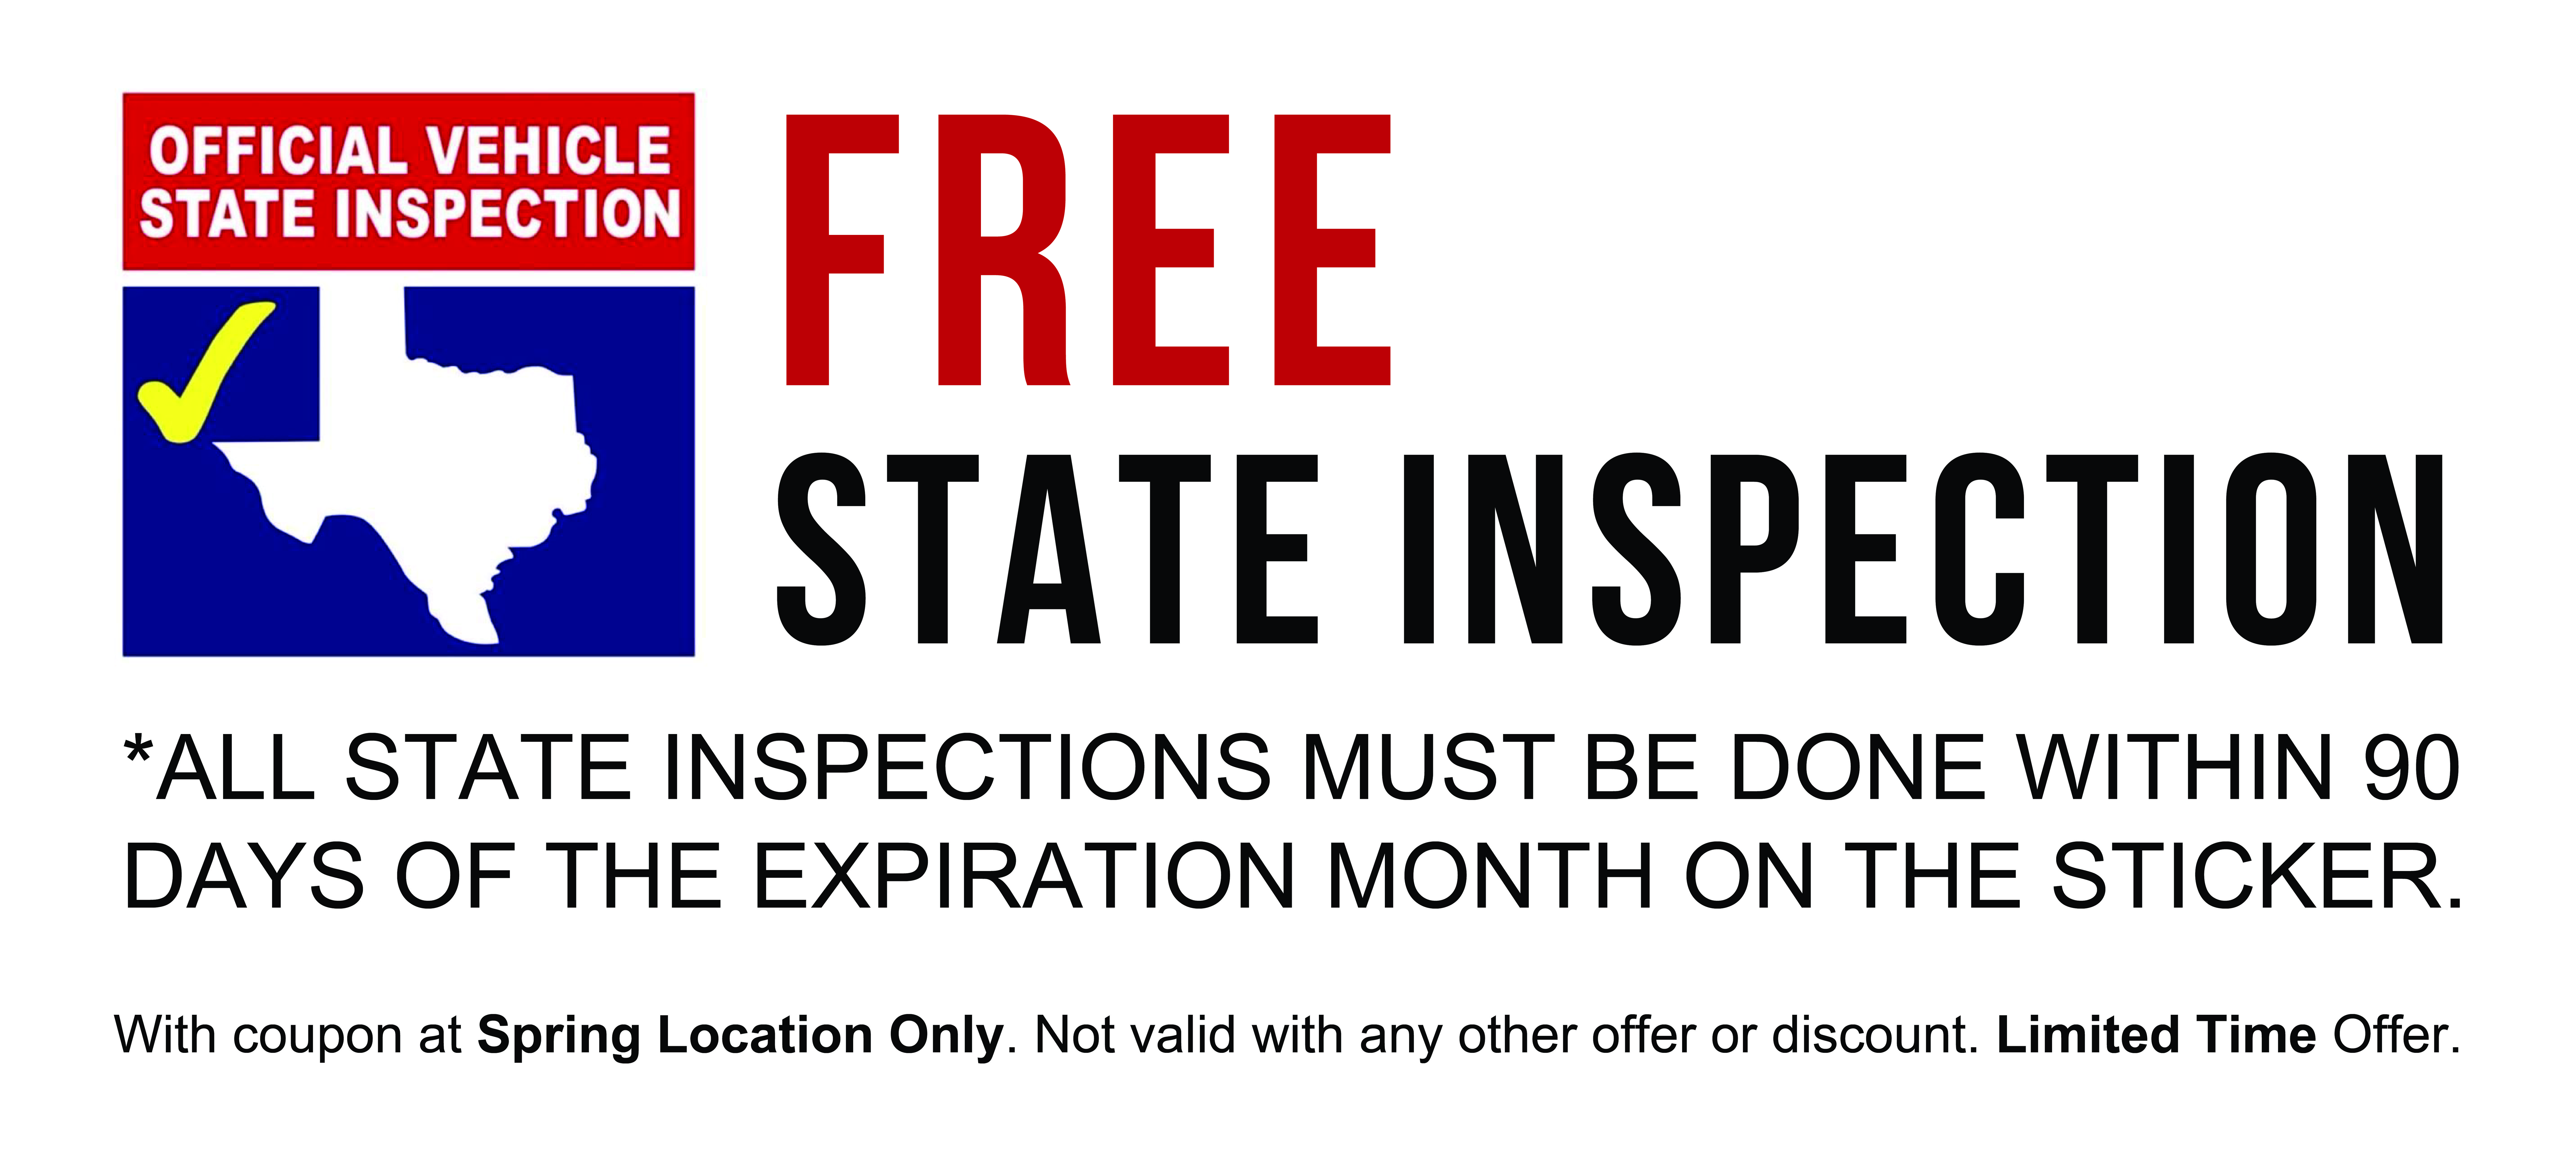 Free state inspection